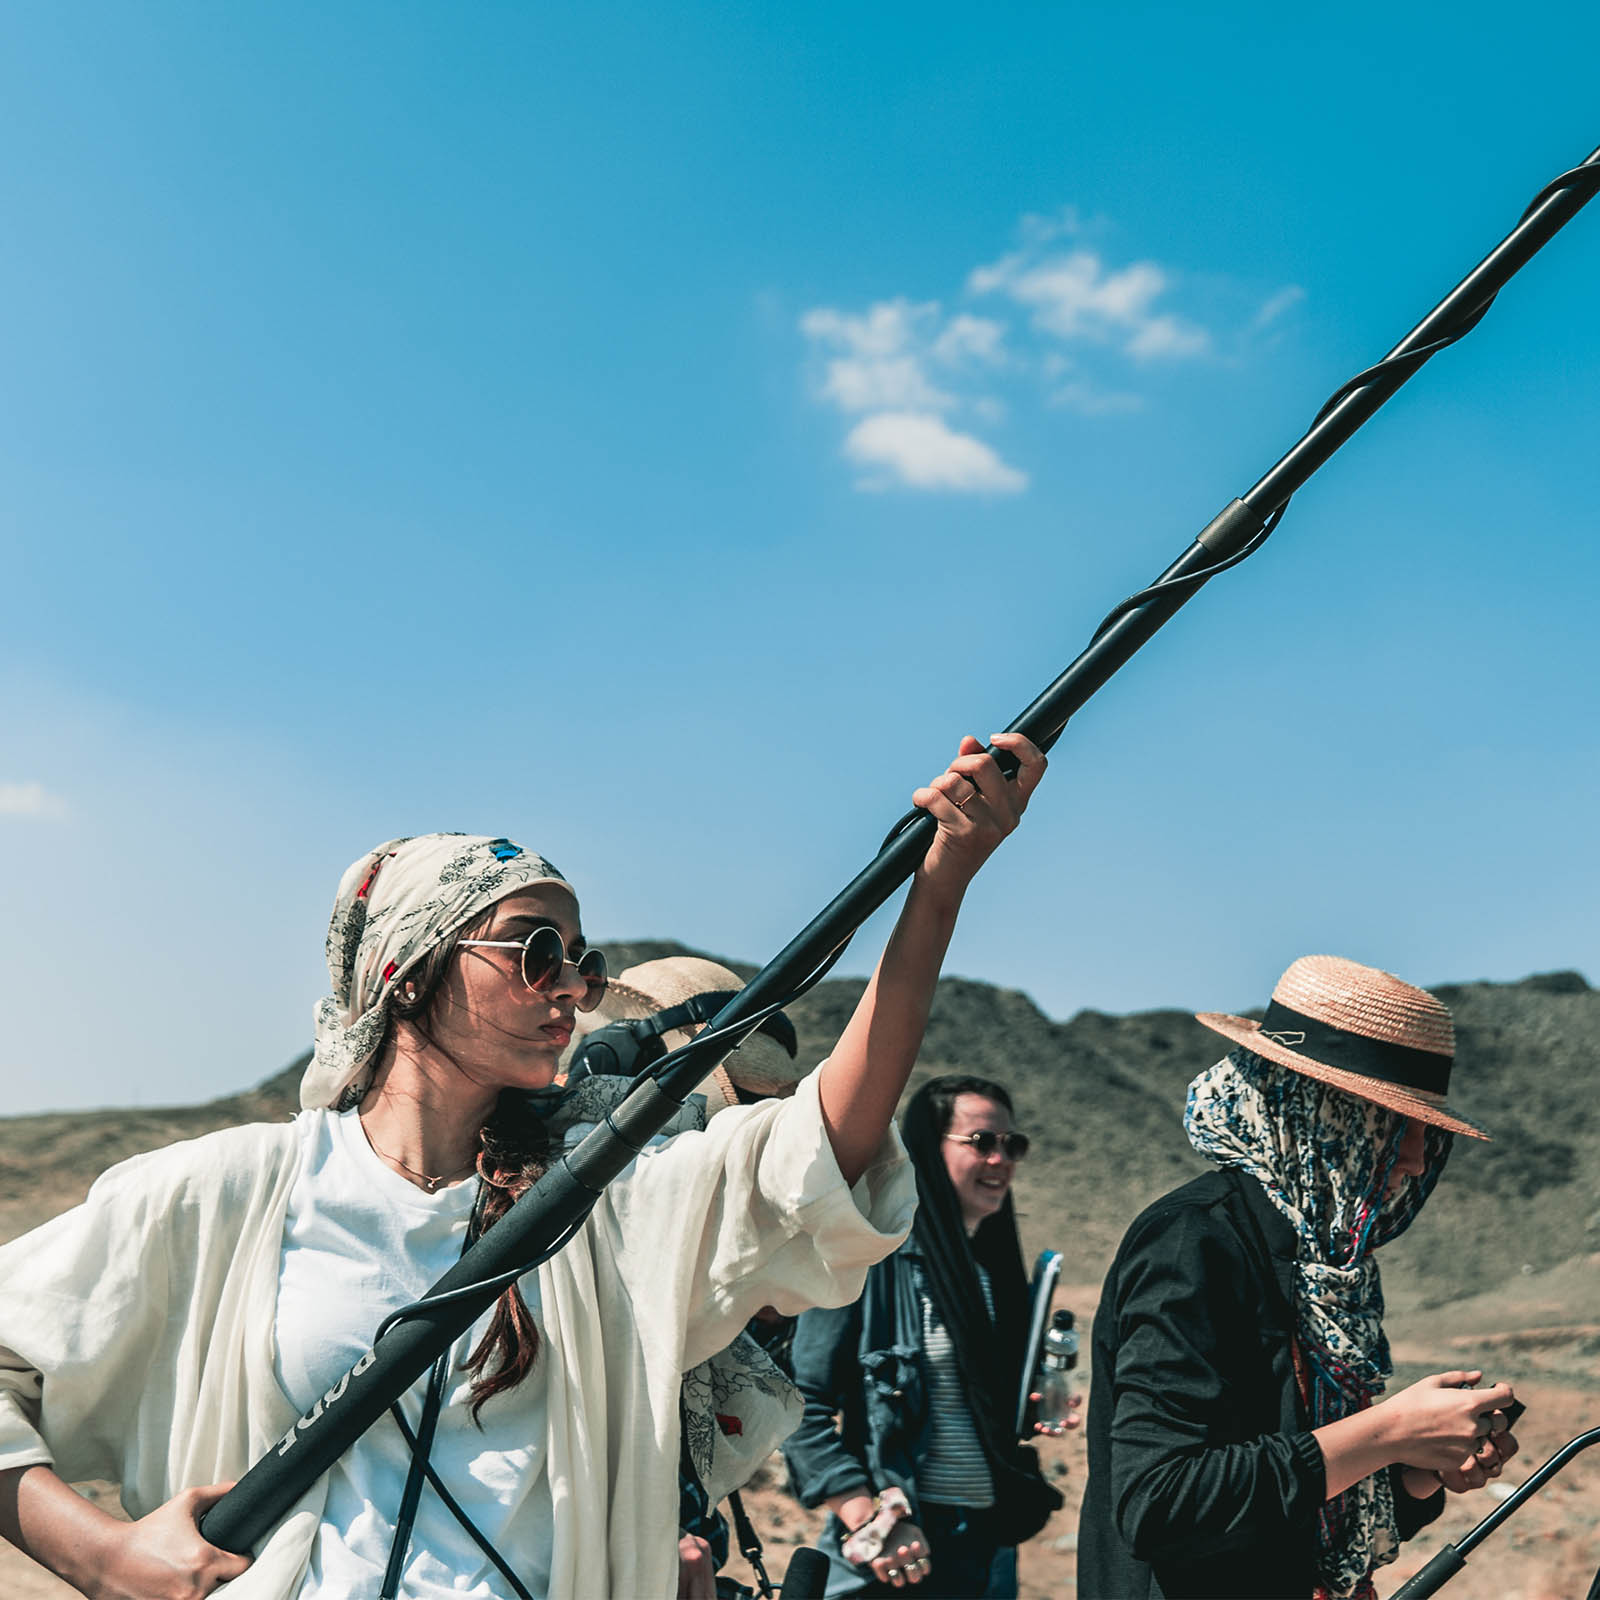 a small group of filmmaking students working on a production in the desert, with one holding a boom microphone and another operating the camera